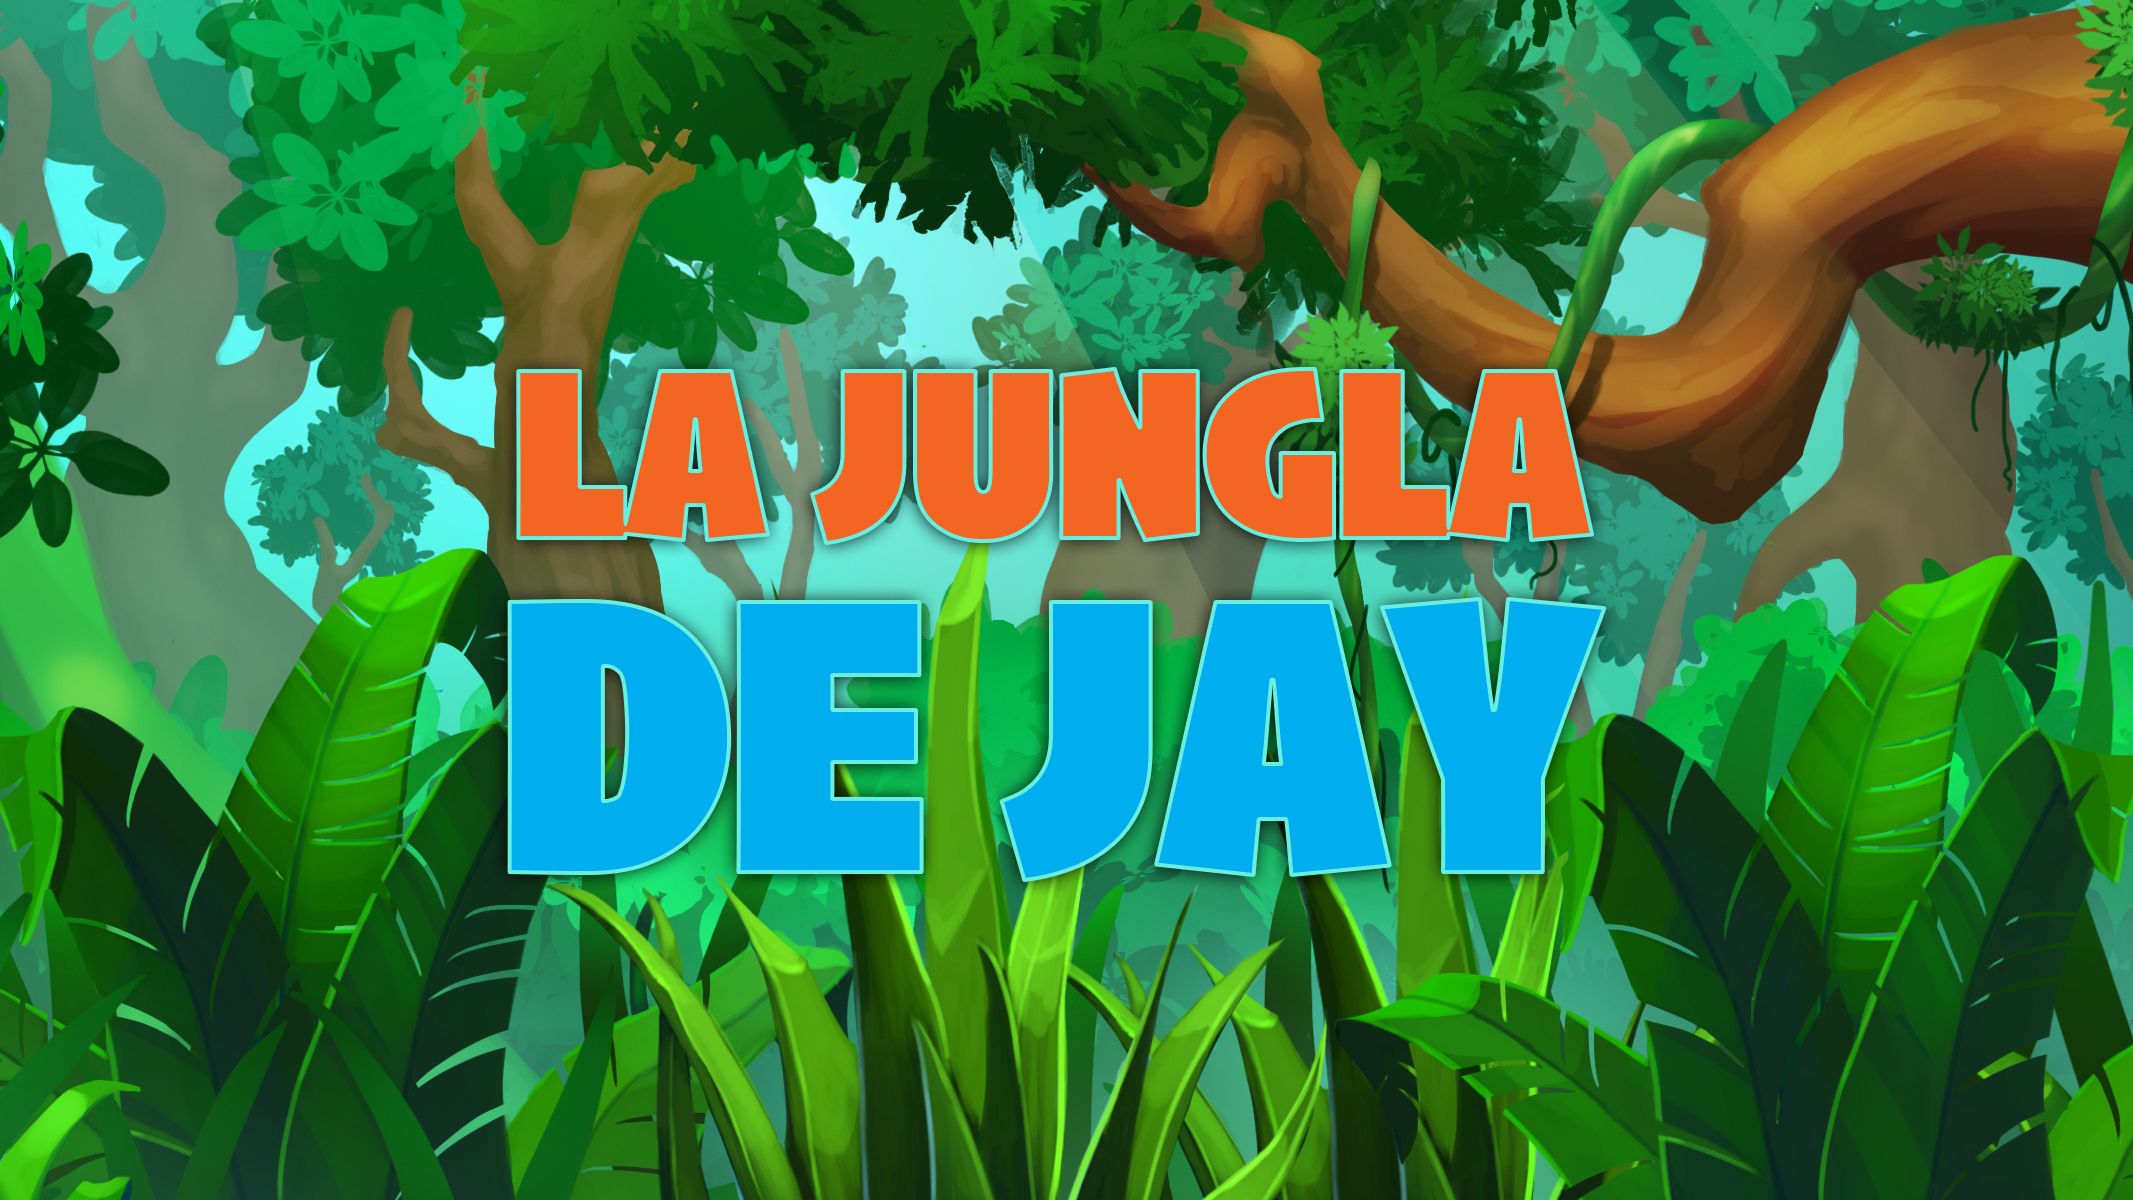 Jay's Jungle is 30 minutes Australian TV series produced by Ambience Entertainment about how the wise and funny C-Mor shines his magical light across the world everyday, searching for thoughts and questions to be explored.